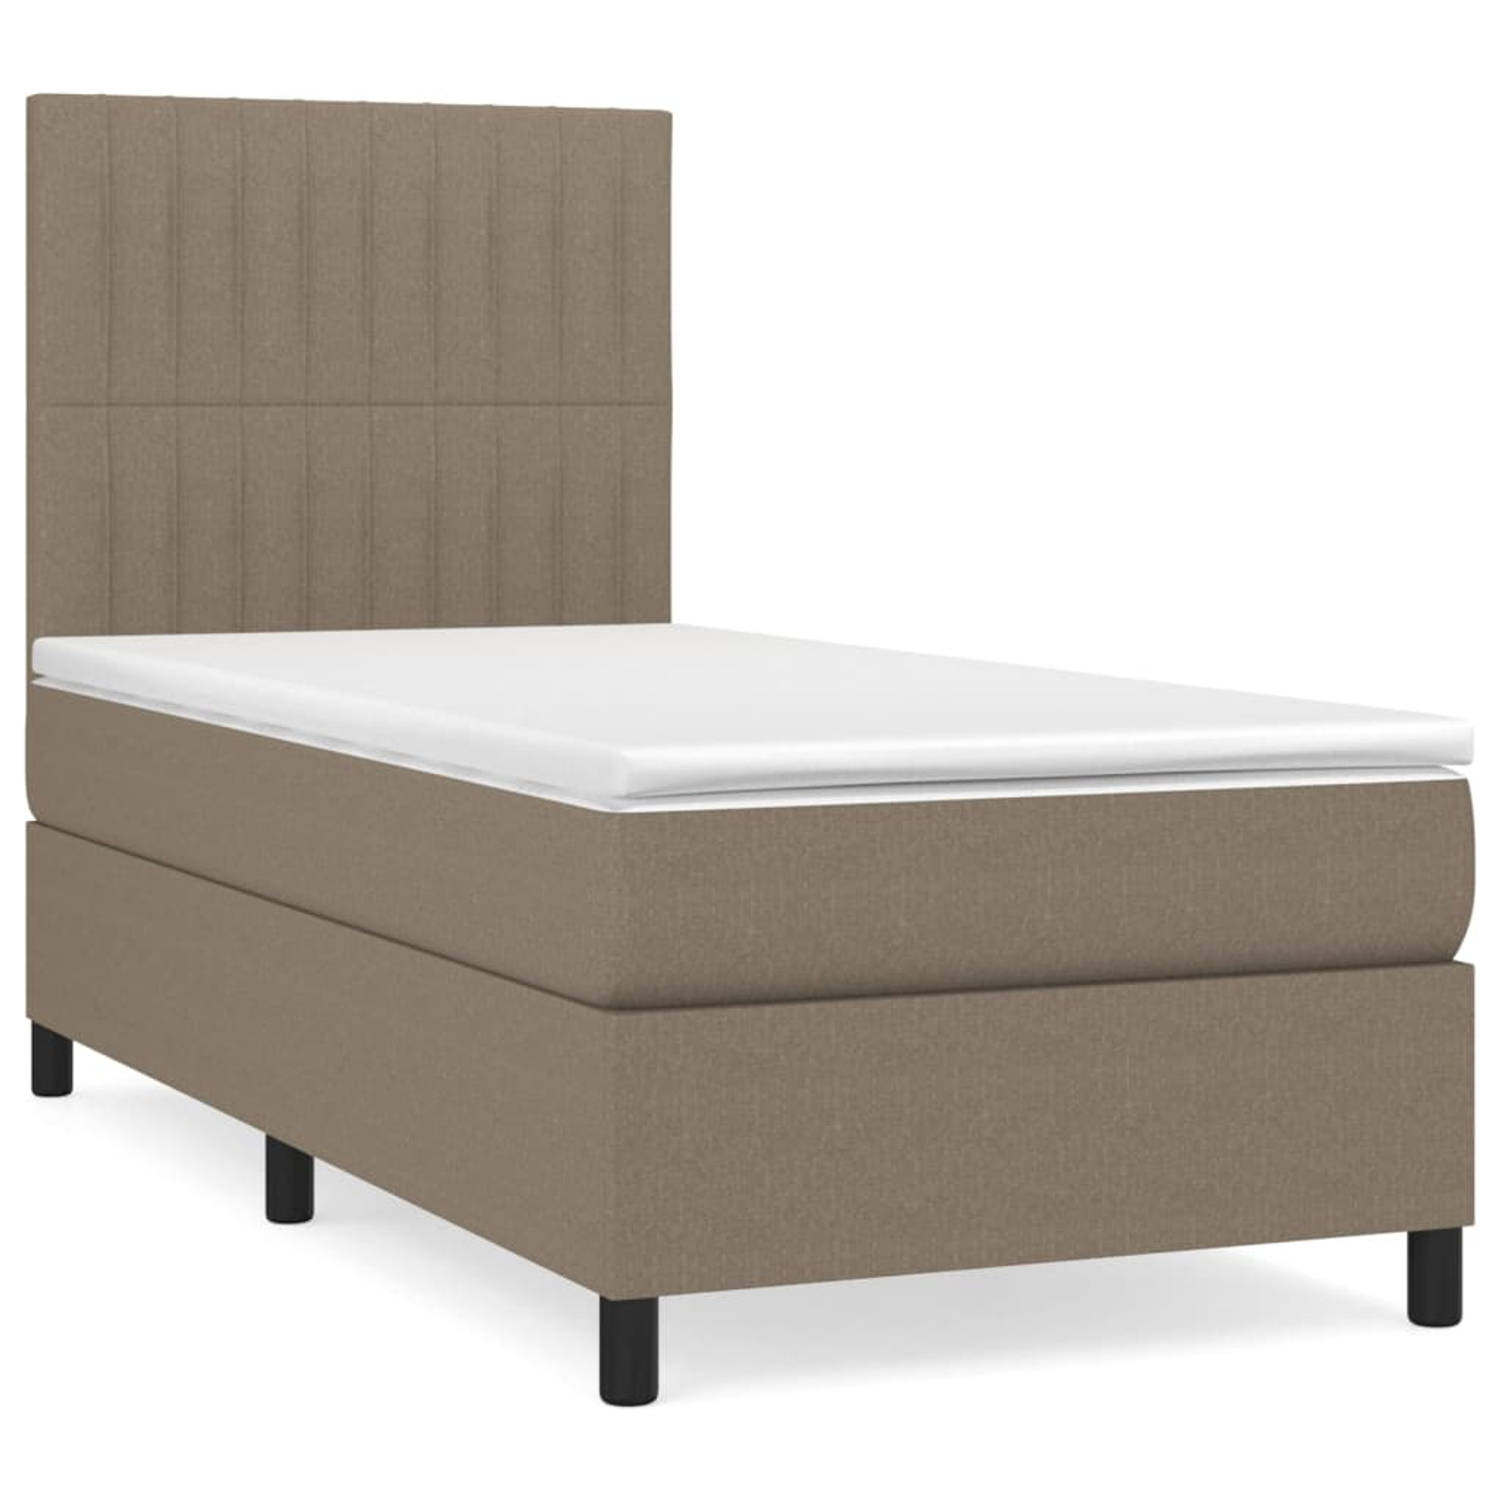 The Living Store Boxspring met matras stof taupe 90x200 cm - Boxspring - Boxsprings - Bed - Slaapmeubel - Boxspringbed - Boxspring Bed - Tweepersoonsbed - Bed Met Matras - Bedframe